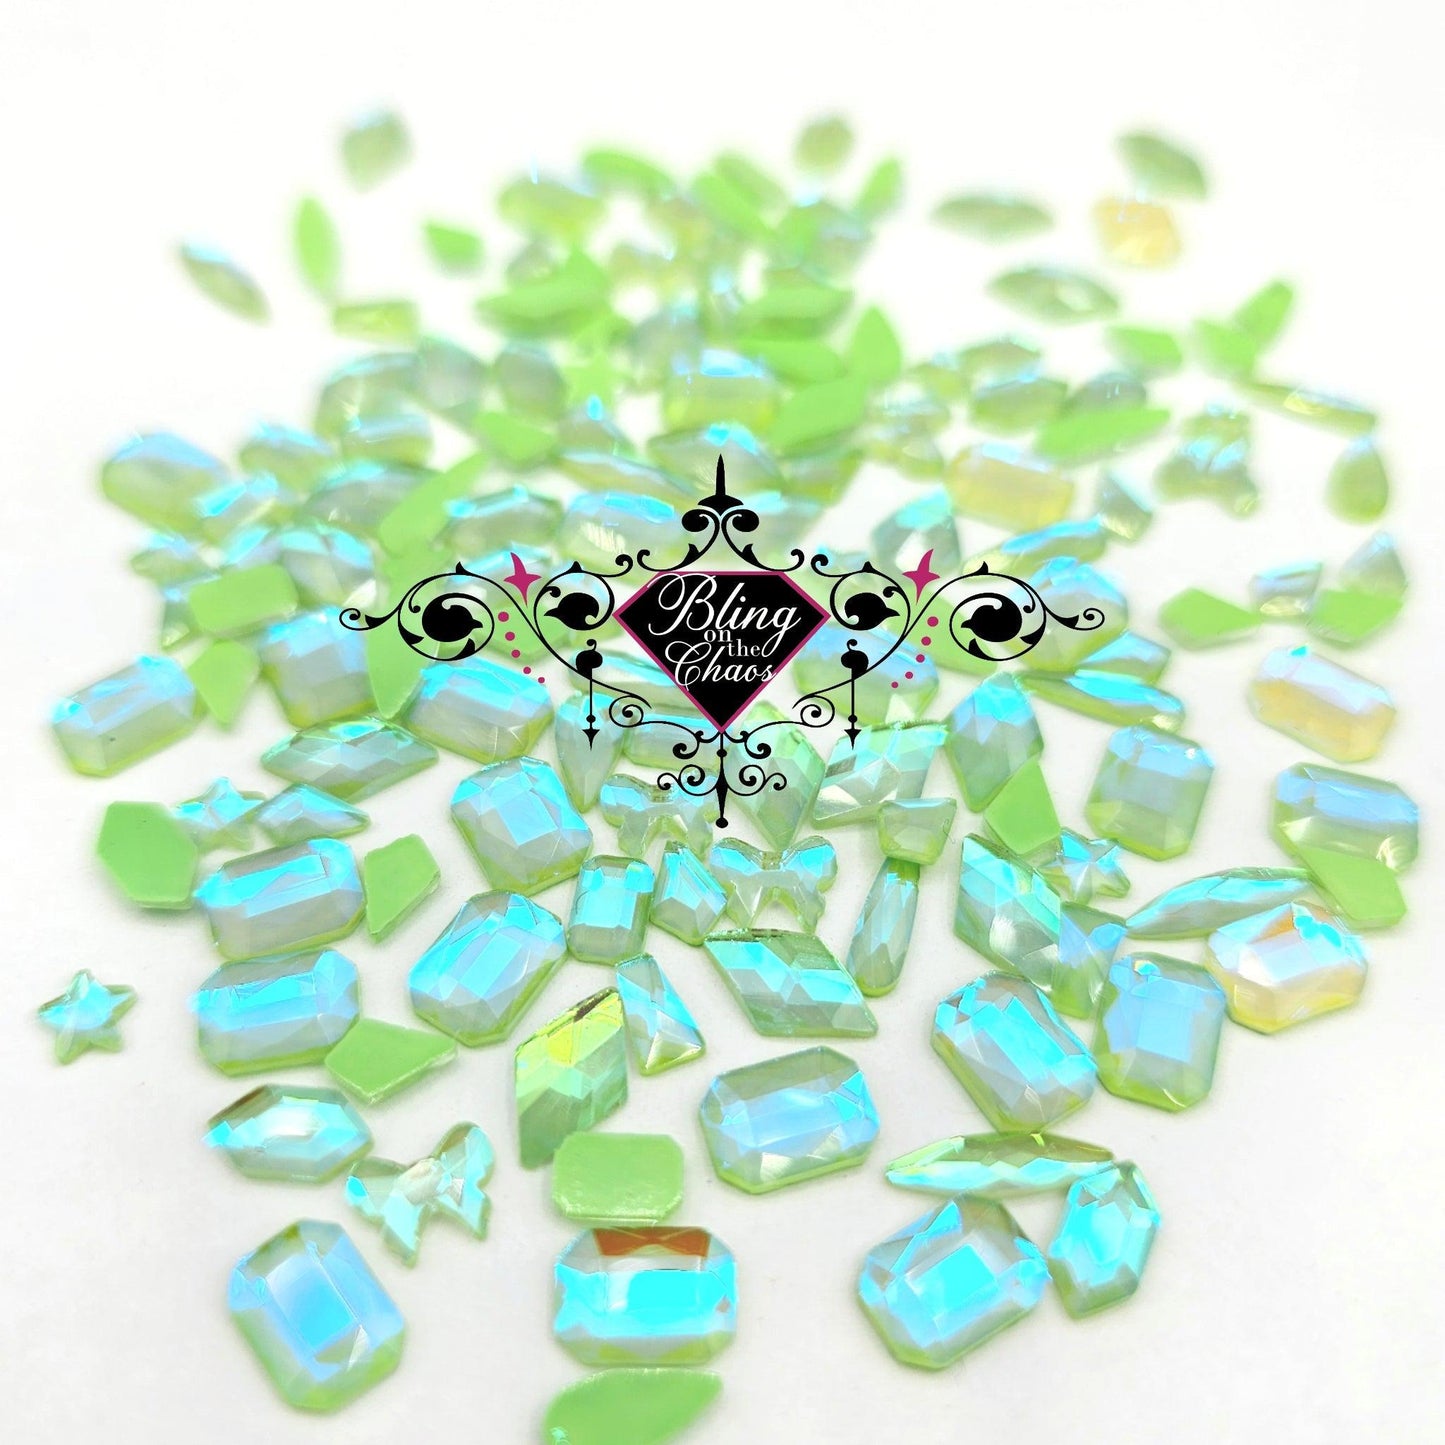 Neon Light Peridot AB Mocha Assorted Shapes-Bling on the Chaos